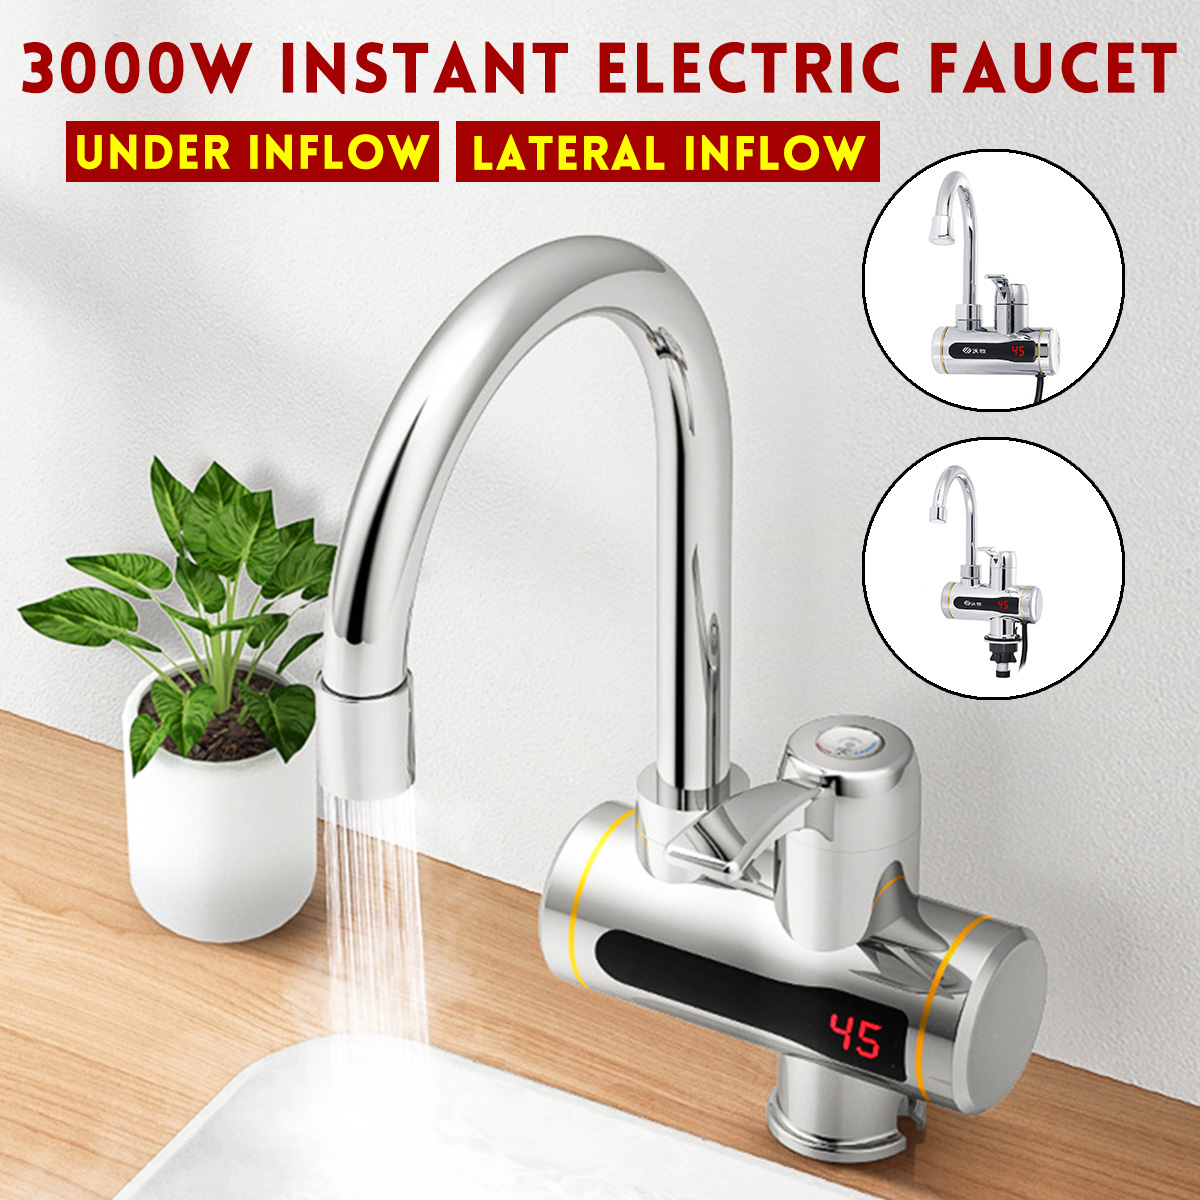 

220V 3000W IPX4 Electric Faucet Tap Hot Water Heater Instant Kitchen Side/Under Faucet